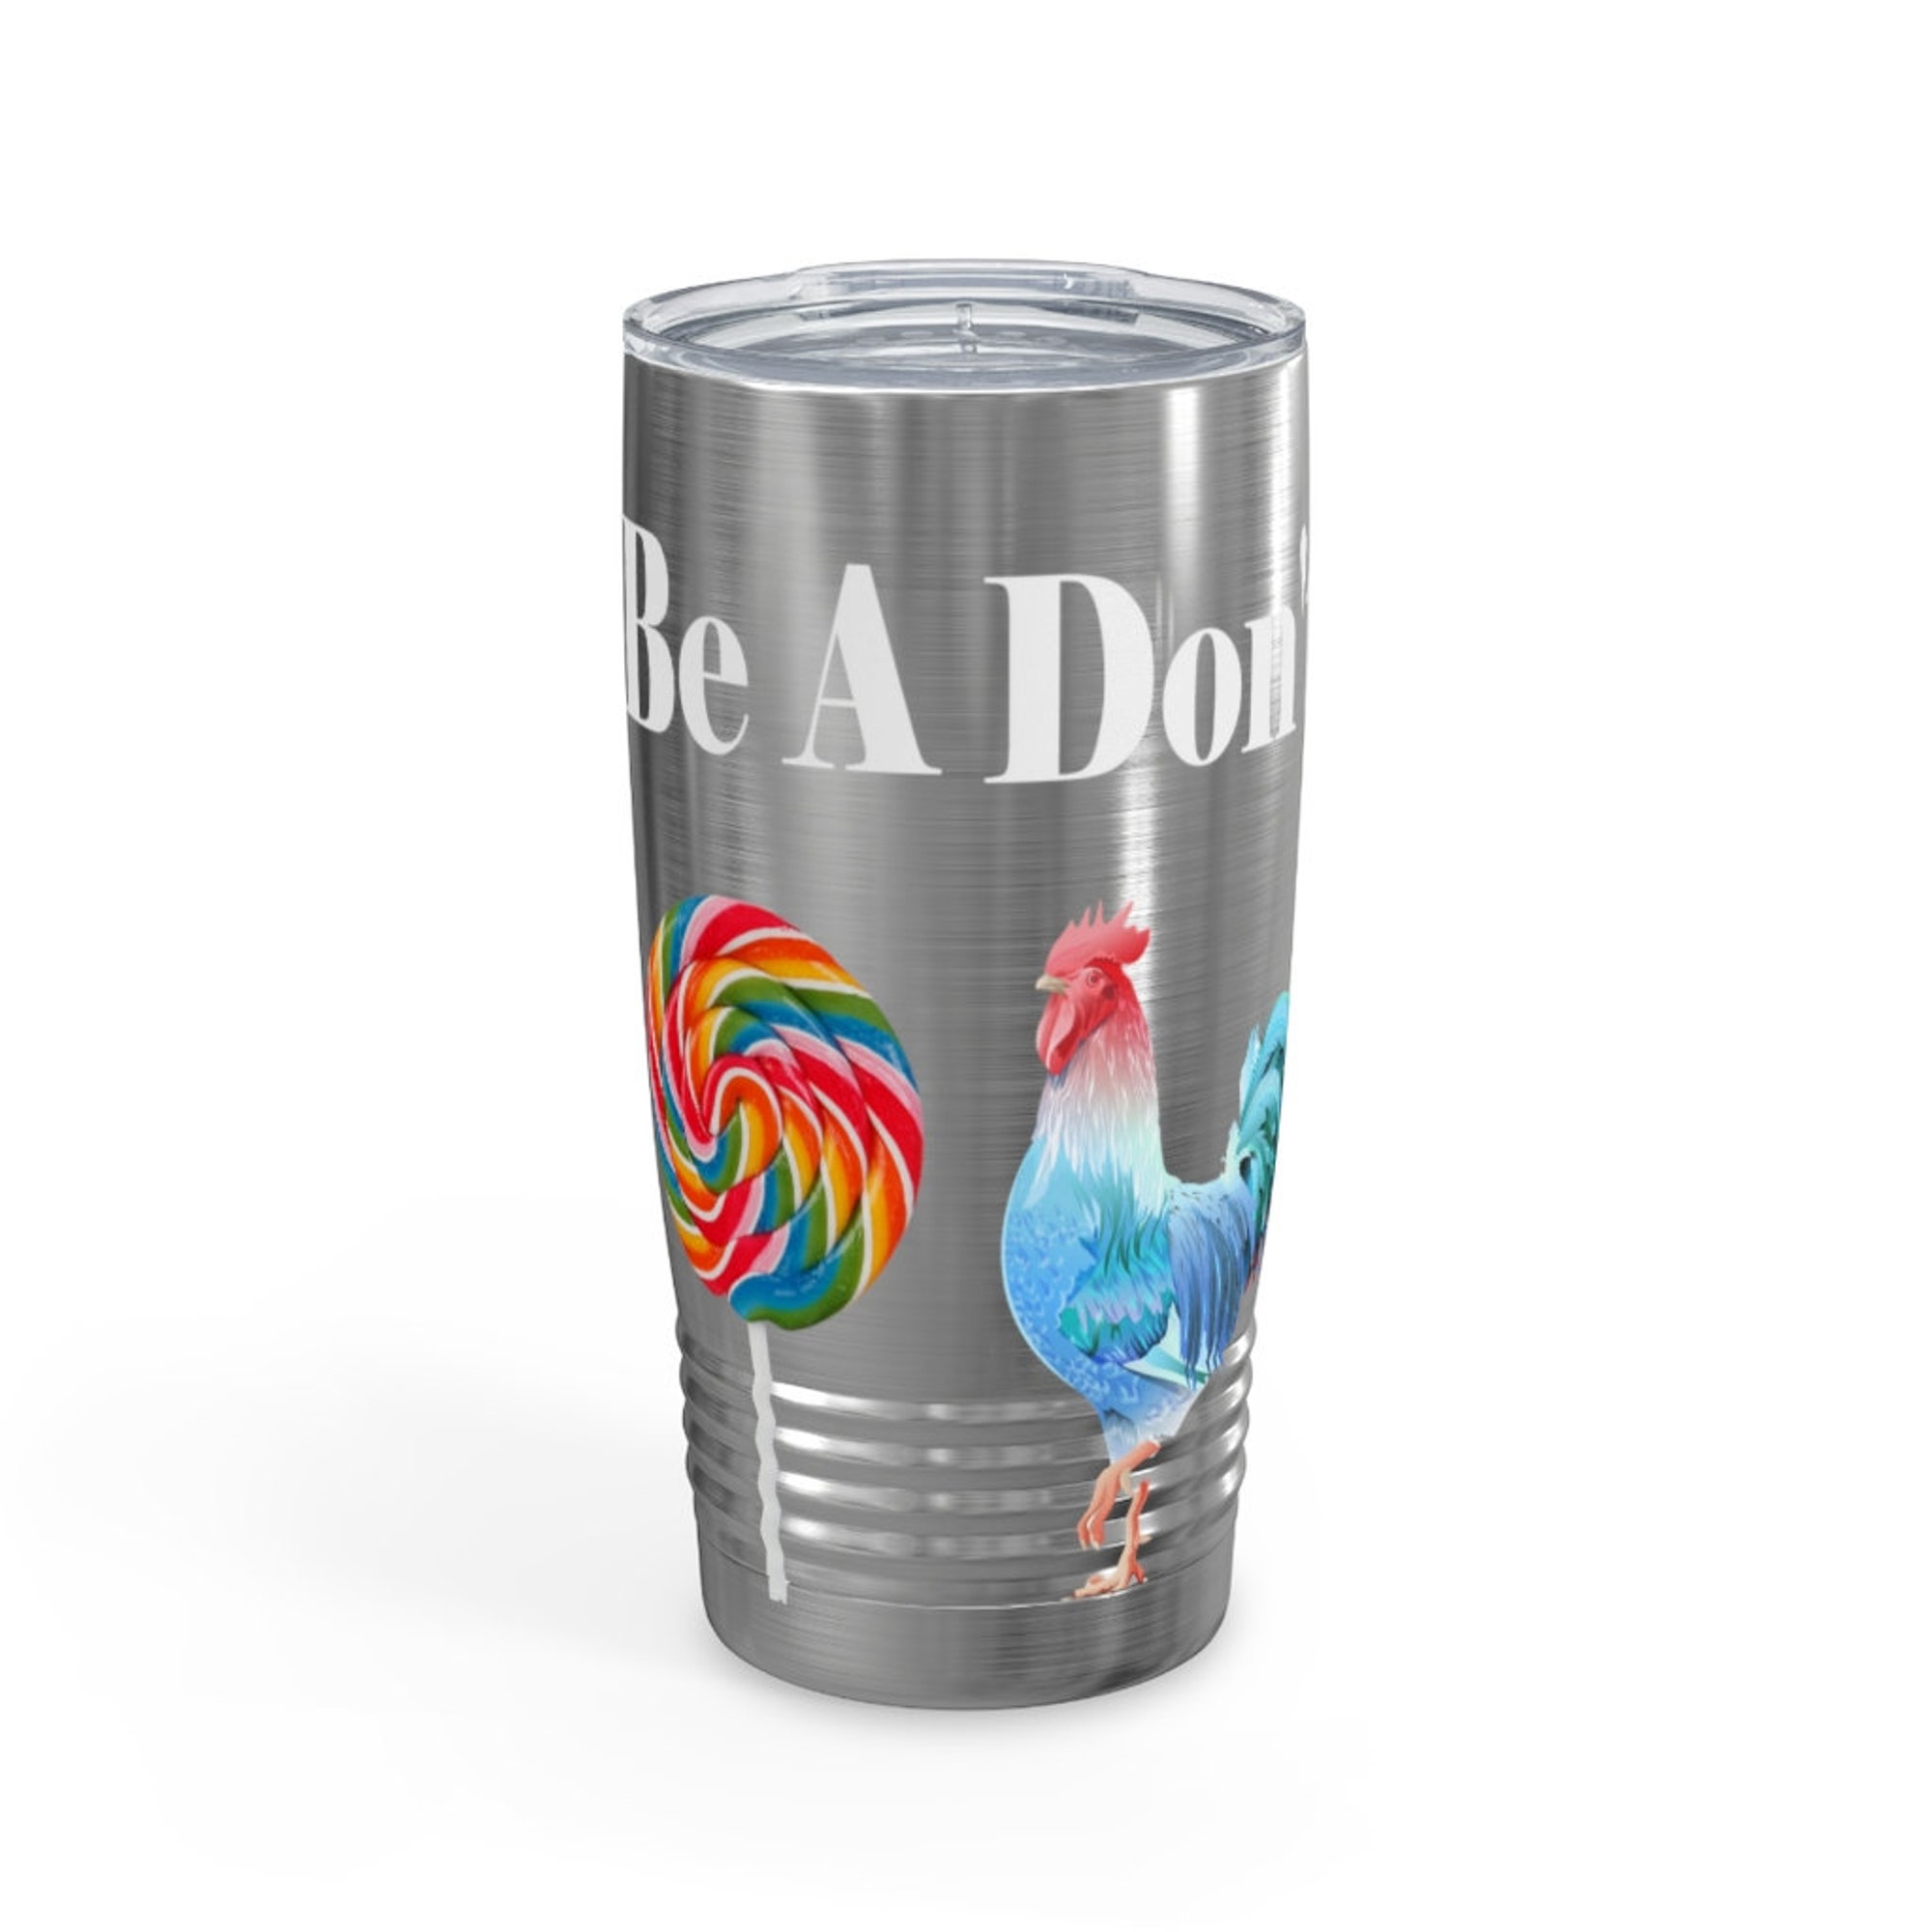 Don't Be A emoji inappropriate Humor Ringneck Tumbler, 20oz